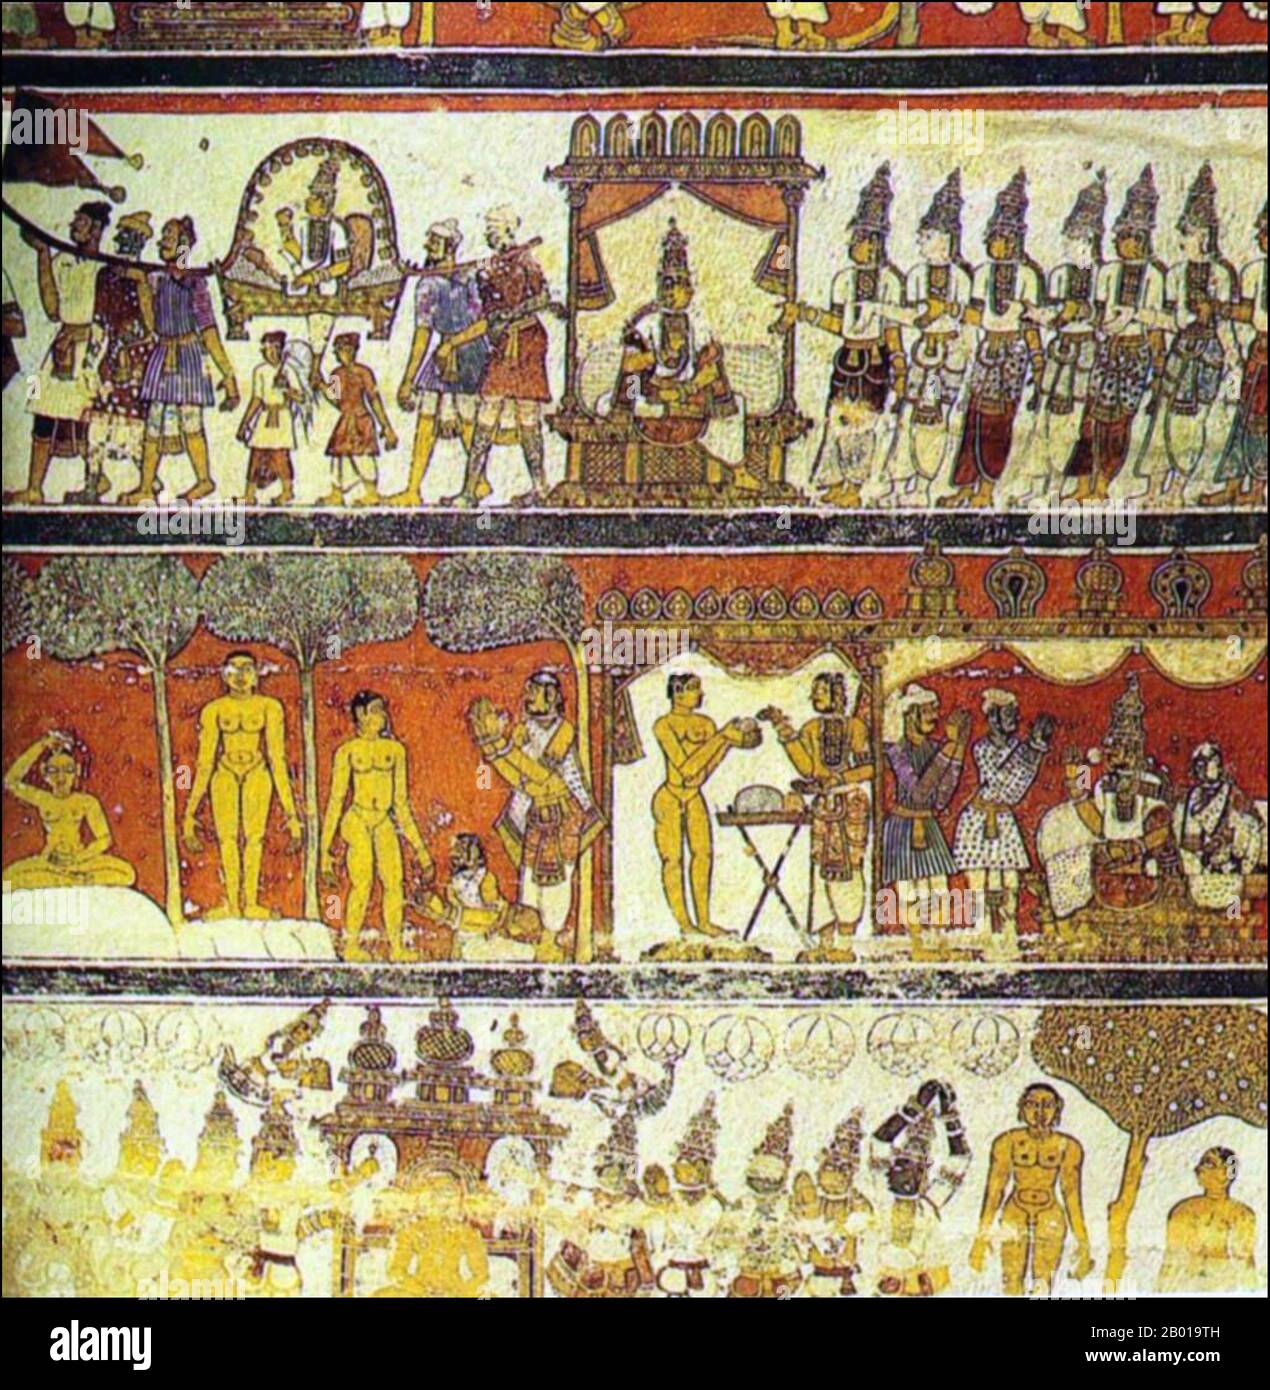 India: Mural from the Jaina Temple at Thiruparruthikundram, Kanchipuram, Tamil Nadu, 17th century.  Top - Scenes from the life of Vardhamāna Mahāvīra (right-to-left): Vardhamāna attaining the spirit of world-flight (vairāgya) and the Laukāntikas appearing to remind him to renounce the world and take to dīkshā; Vardhamāna going to the forest in a palanquin for dīkshā.  Middle - Scenes from the life of Vardhamāna Mahāvīra (left-to-right): Vardhamāna performs dīkshā; Vardhamāna goes out for charyā and partakes of food offered by King Kūla ruler of Kūlagrāma. Stock Photo